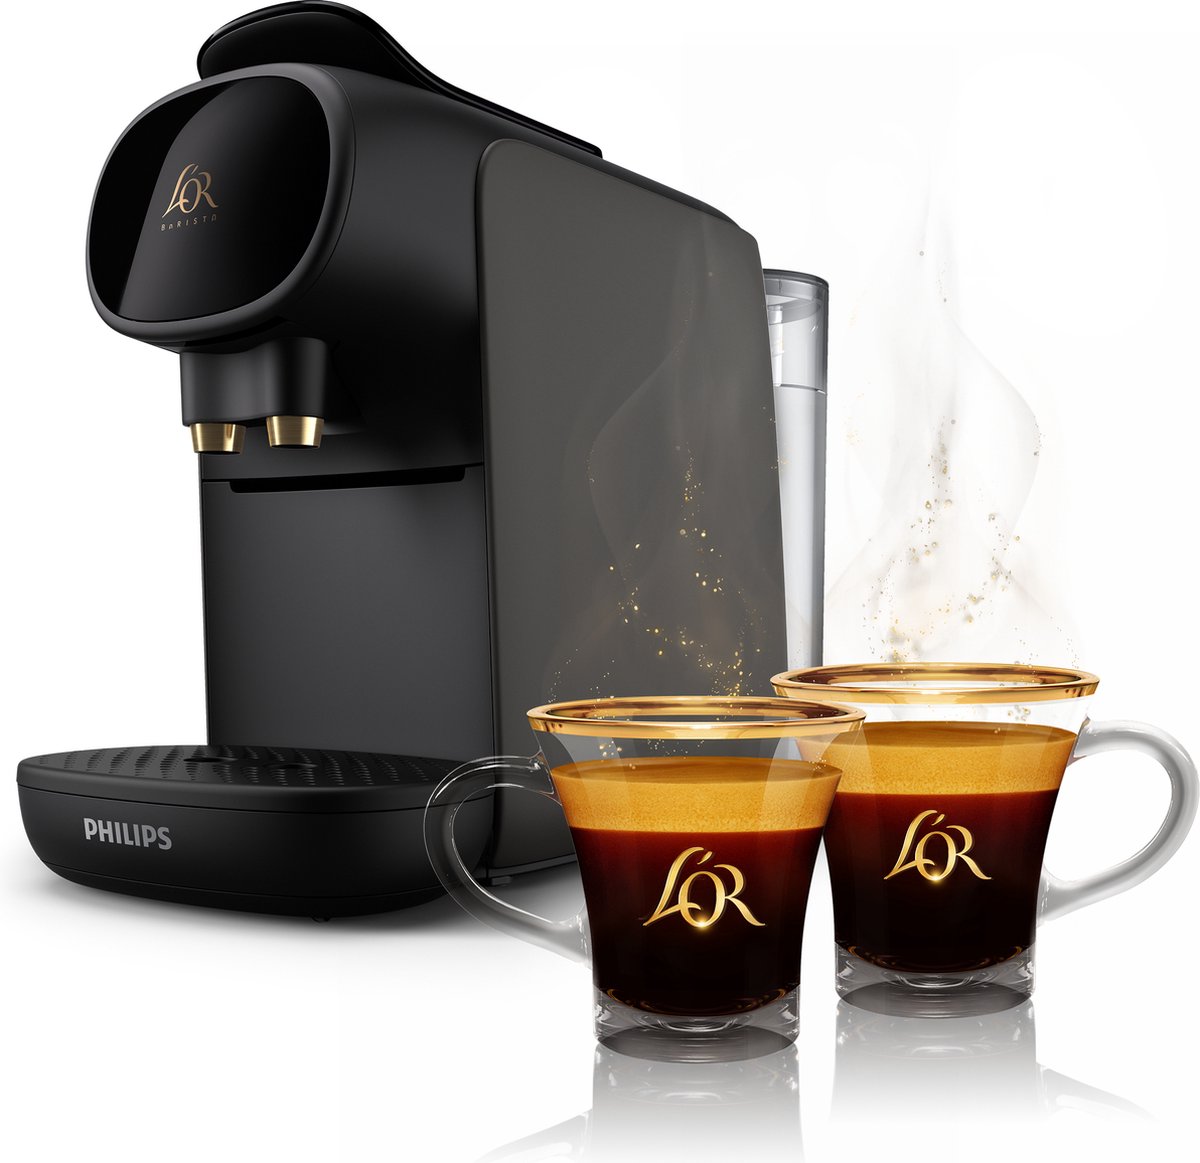 philips koffie automaat cups bol.com korting